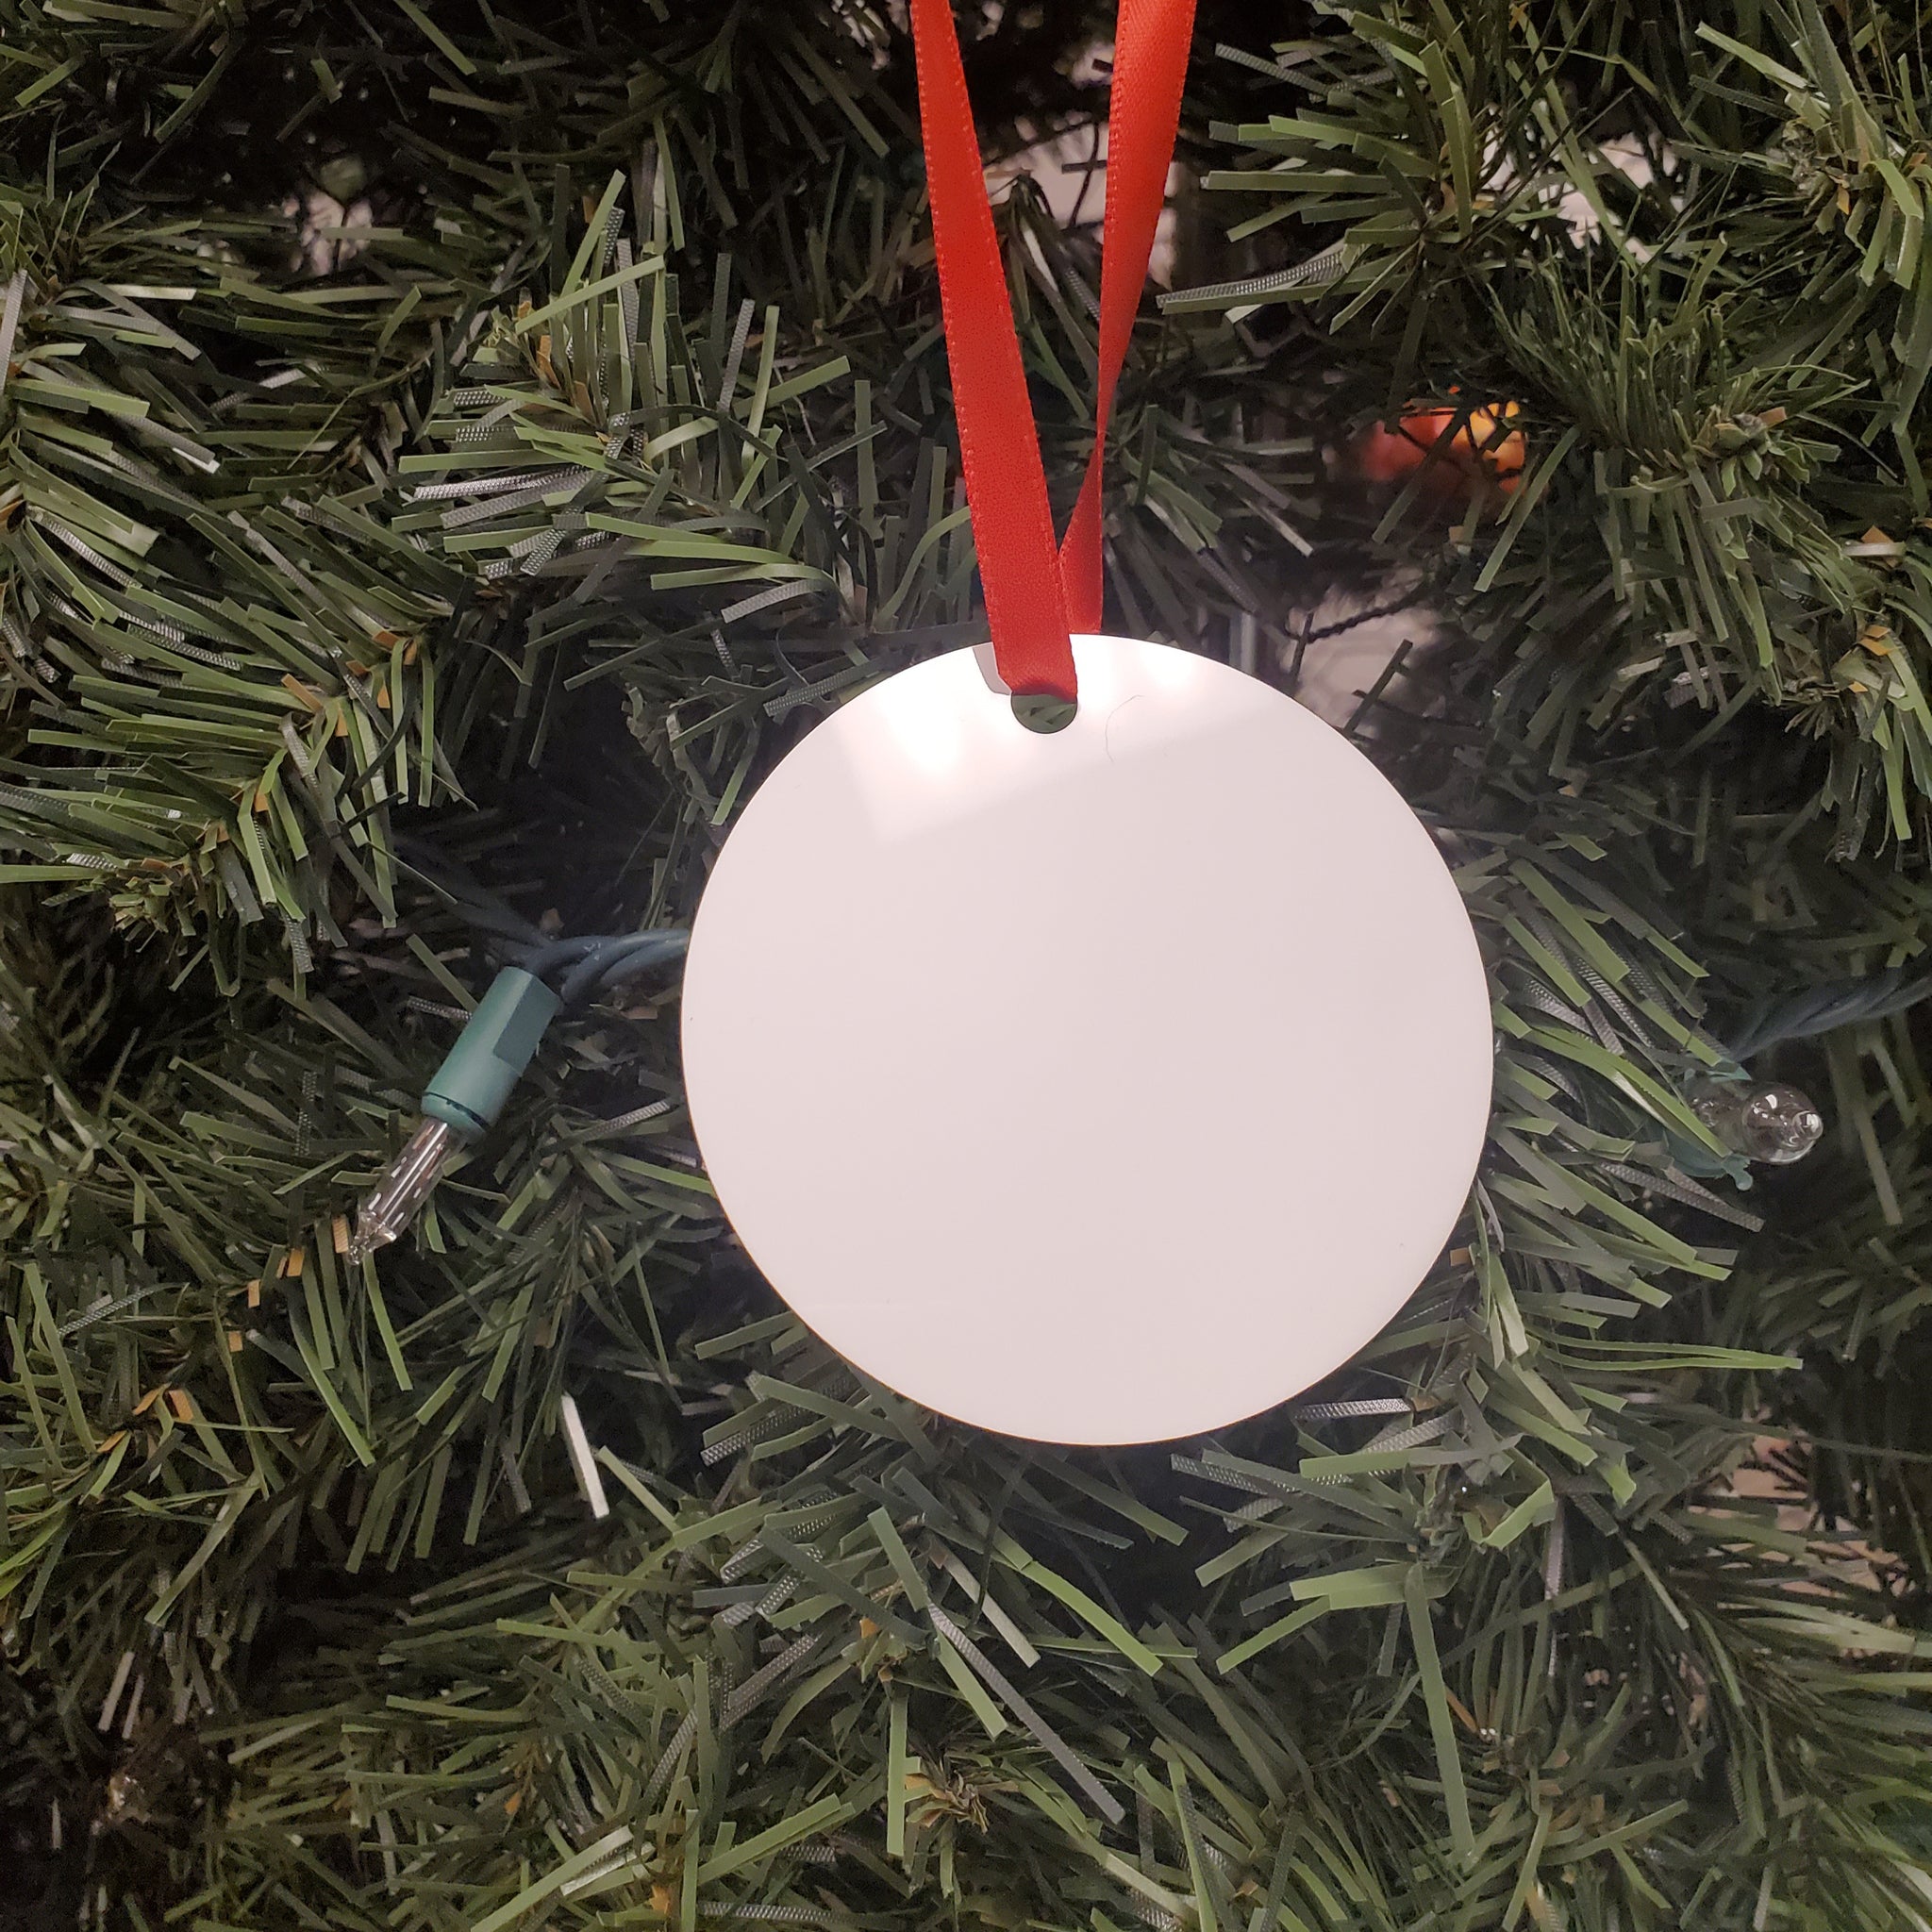 Sublimation Ornament 2.75" Gloss White Round Aluminum, 2-Sided